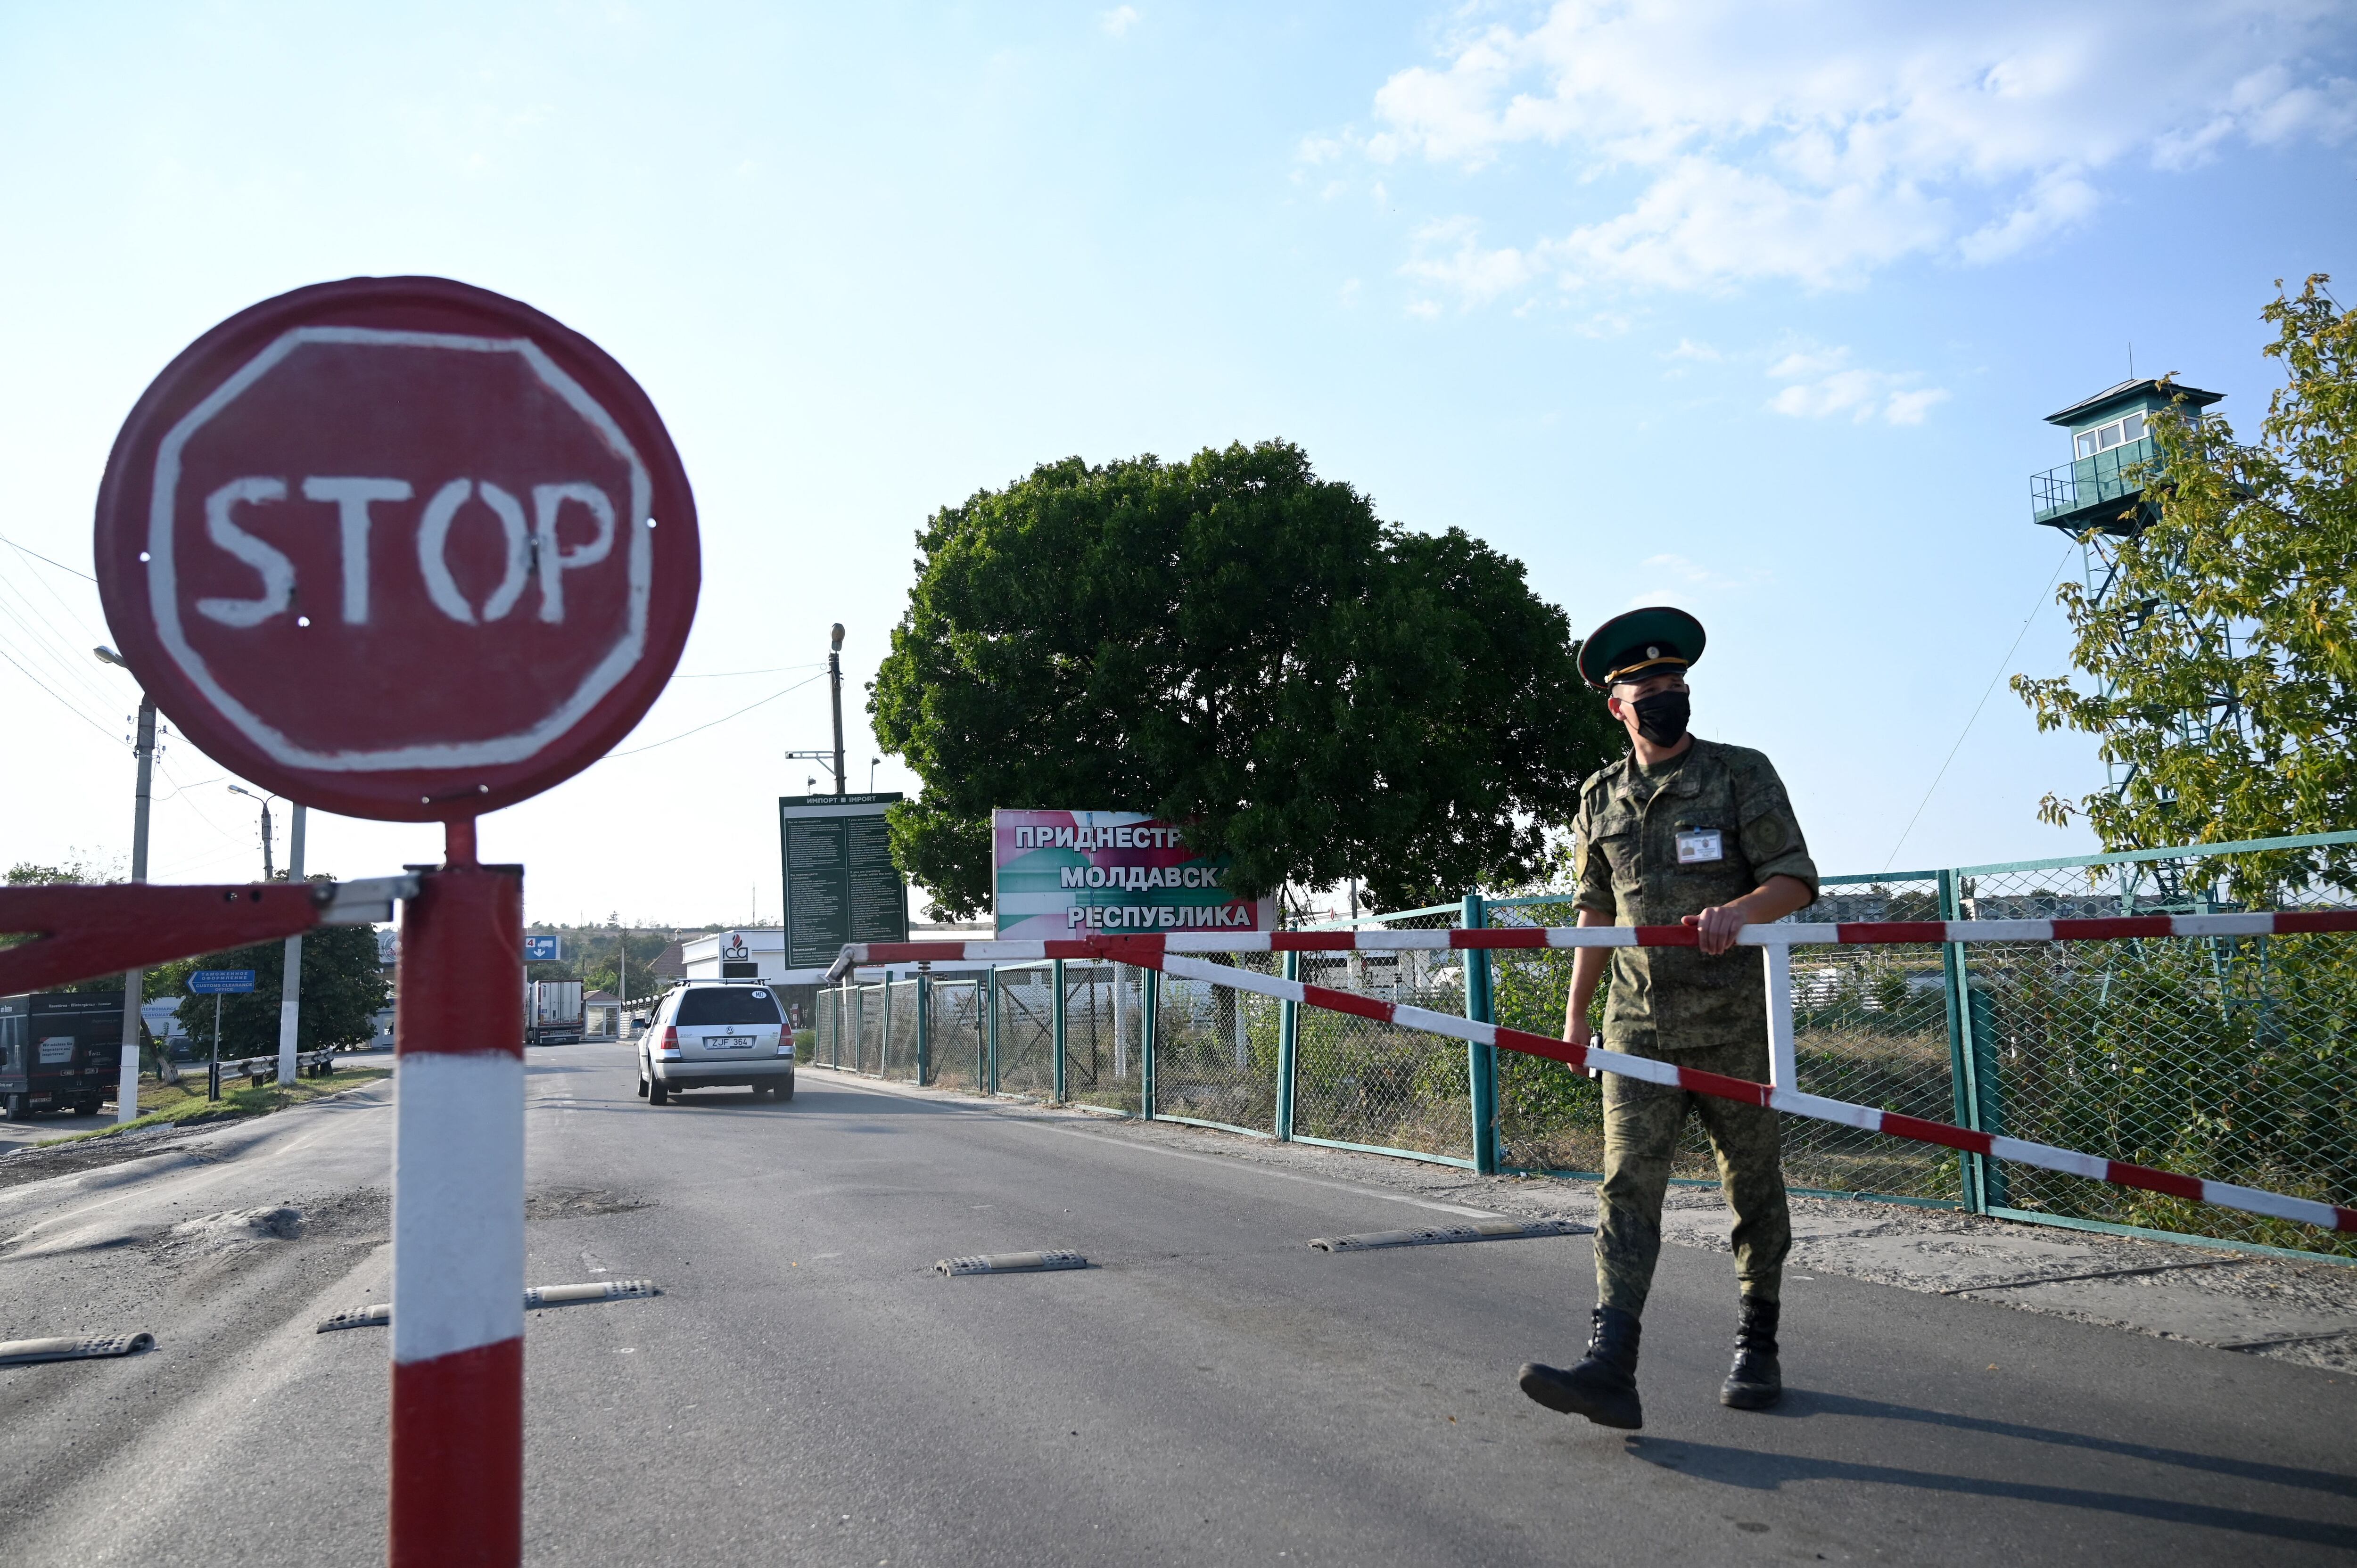 A Transnistrian border guard guards an area on the border with Ukraine on September 13, 2021. (Sergei GAPON / AFP).